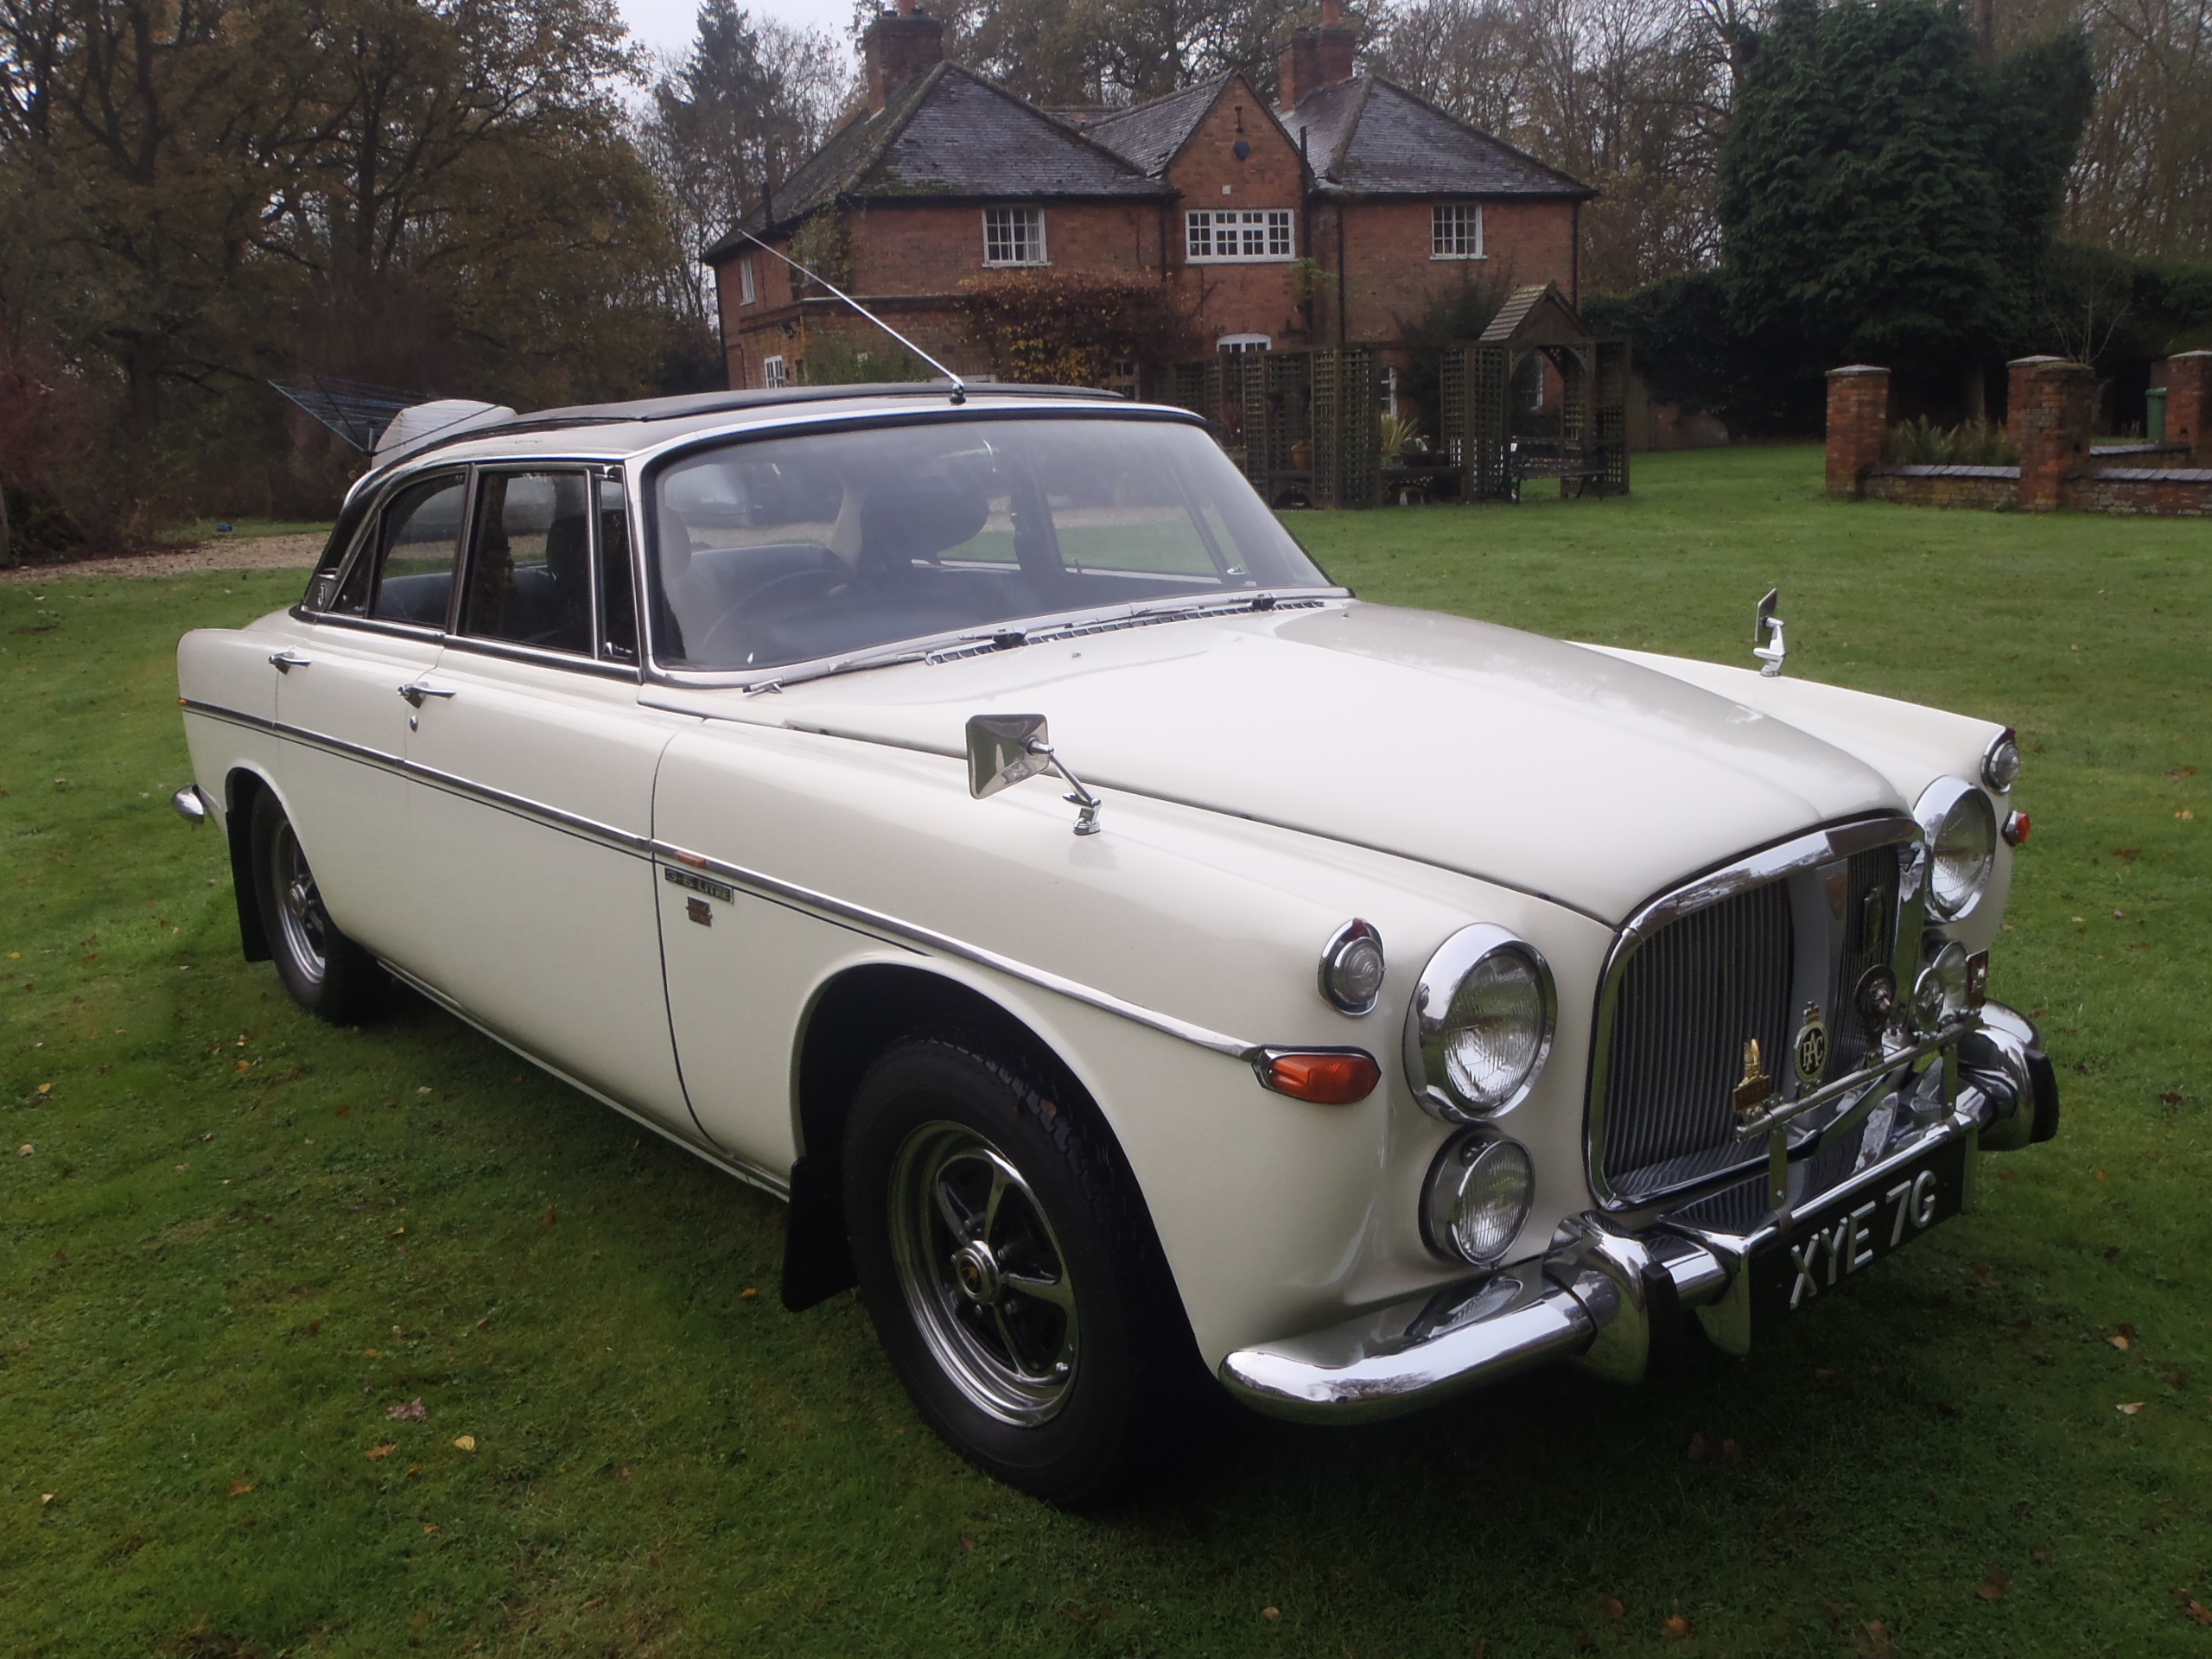 1969 Rover P5B Coupe (CAT C): WITHDRAWN FROM SALE